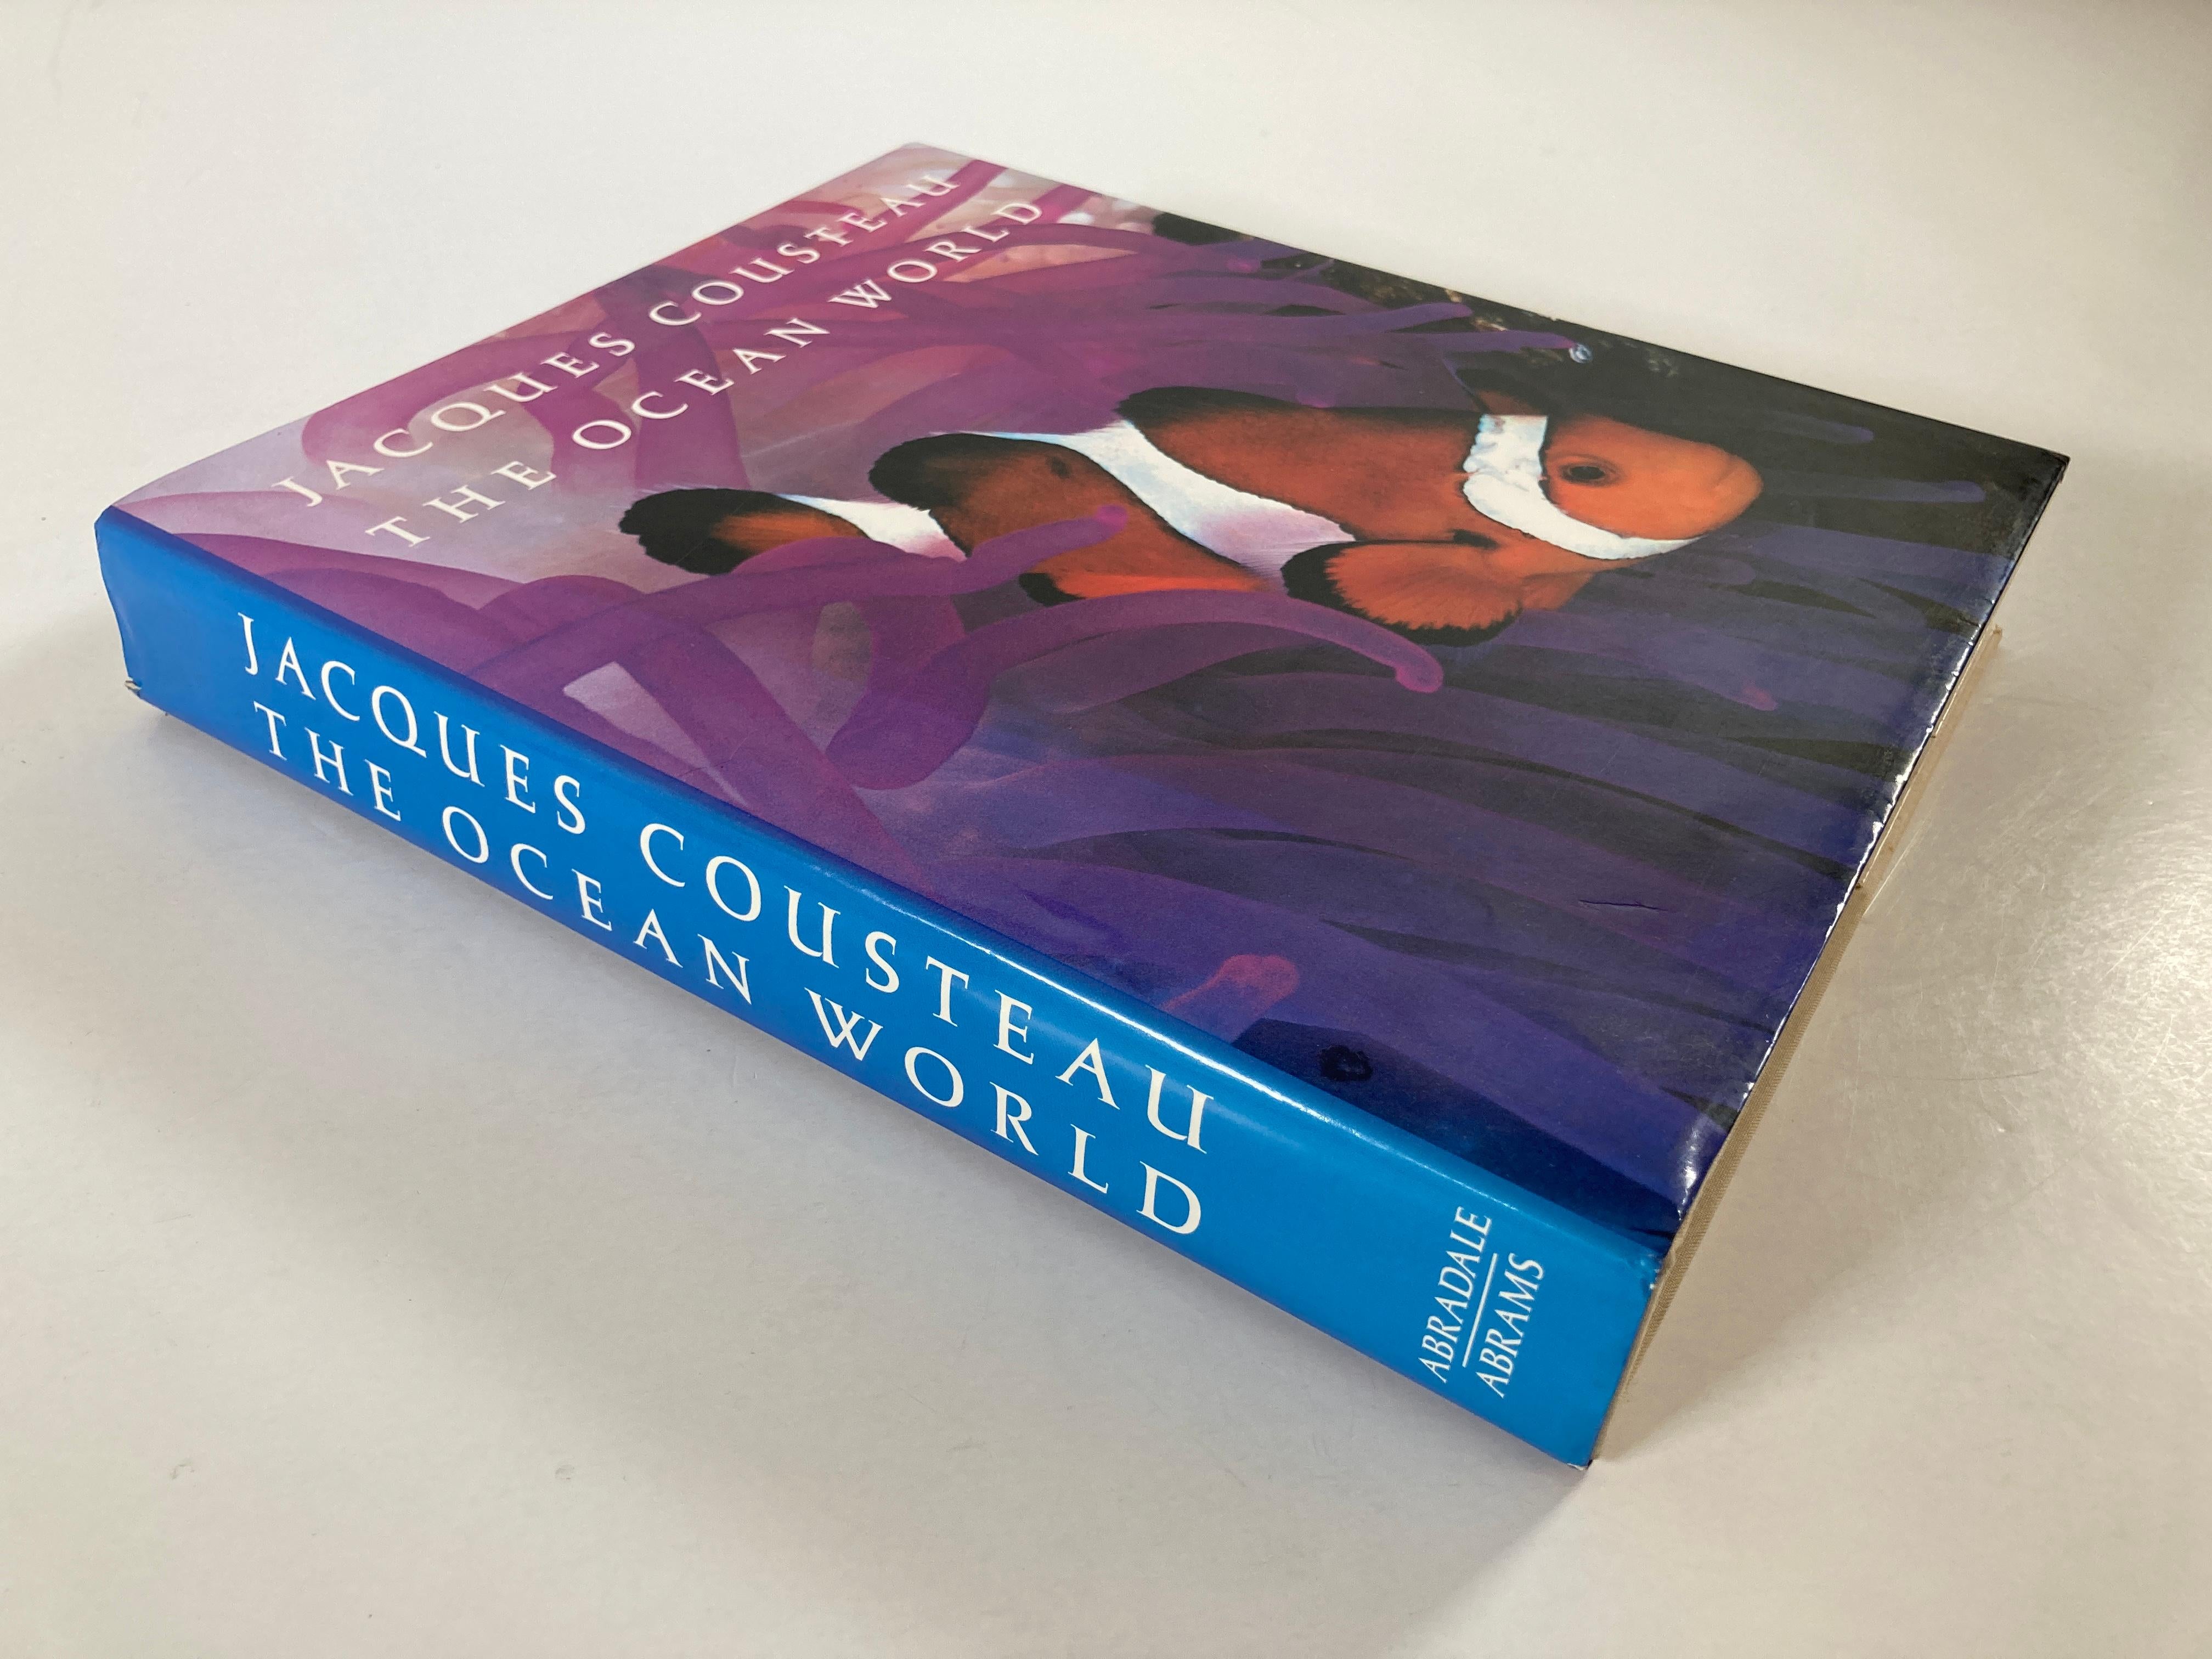 jacques cousteau the ocean world book